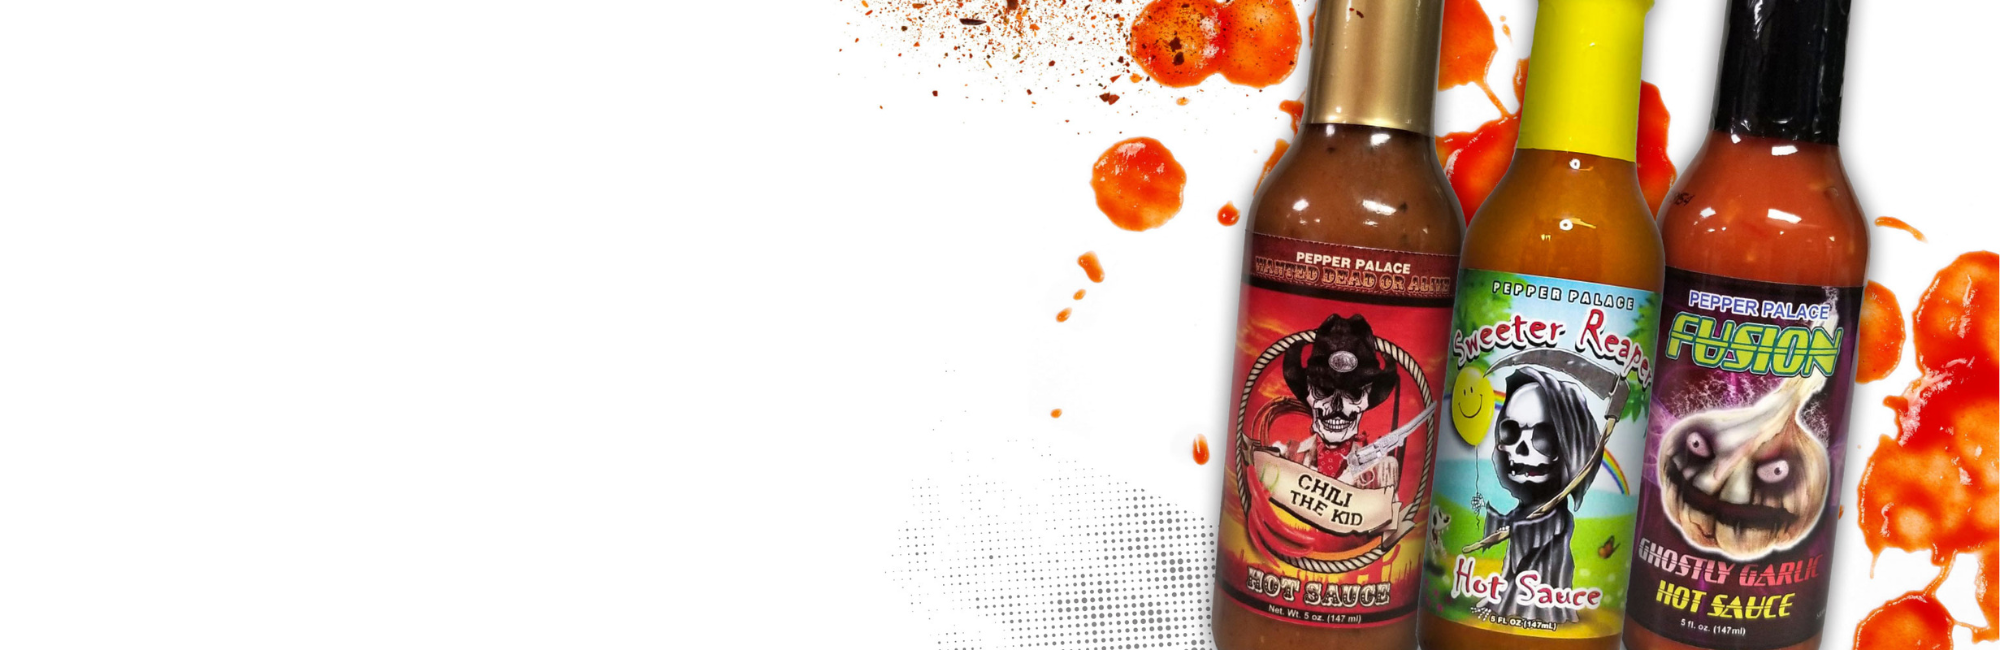  Louisiana Brand The Original Wing Sauce, Added Hot & Spicy  Flavor for Wings, 23 Servings Per Bottle, Kosher Wing Sauce 12 FL OZ Glass  Bottle (Pack of 3) : Grocery & Gourmet Food